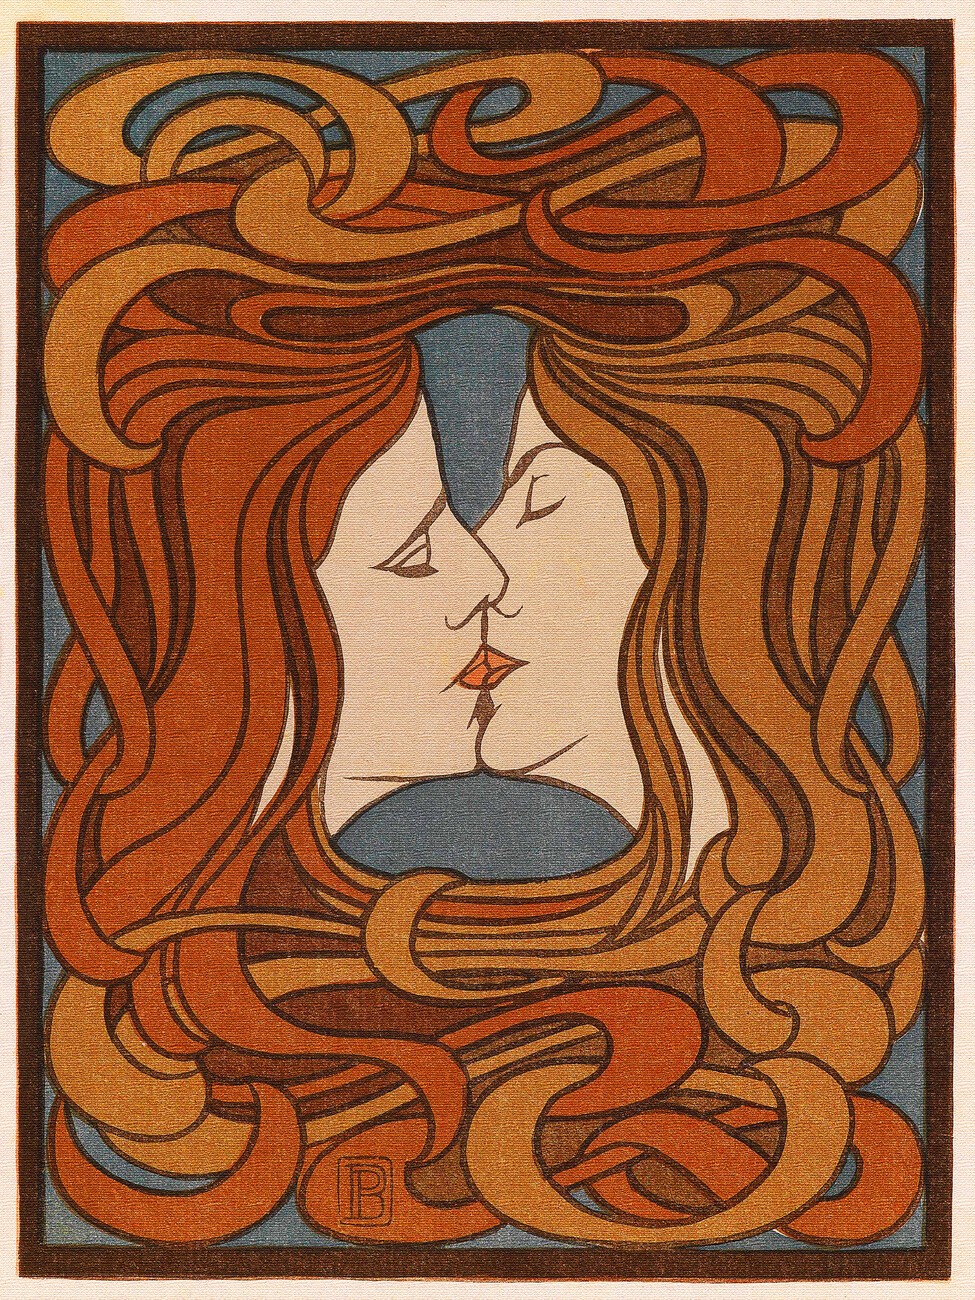 The Kiss (Vintage Homoerotic Art Nouveau / Lesbian Interest Gay Romance  Poster) - Peter Behrens | Reproductions of famous paintings for your wall